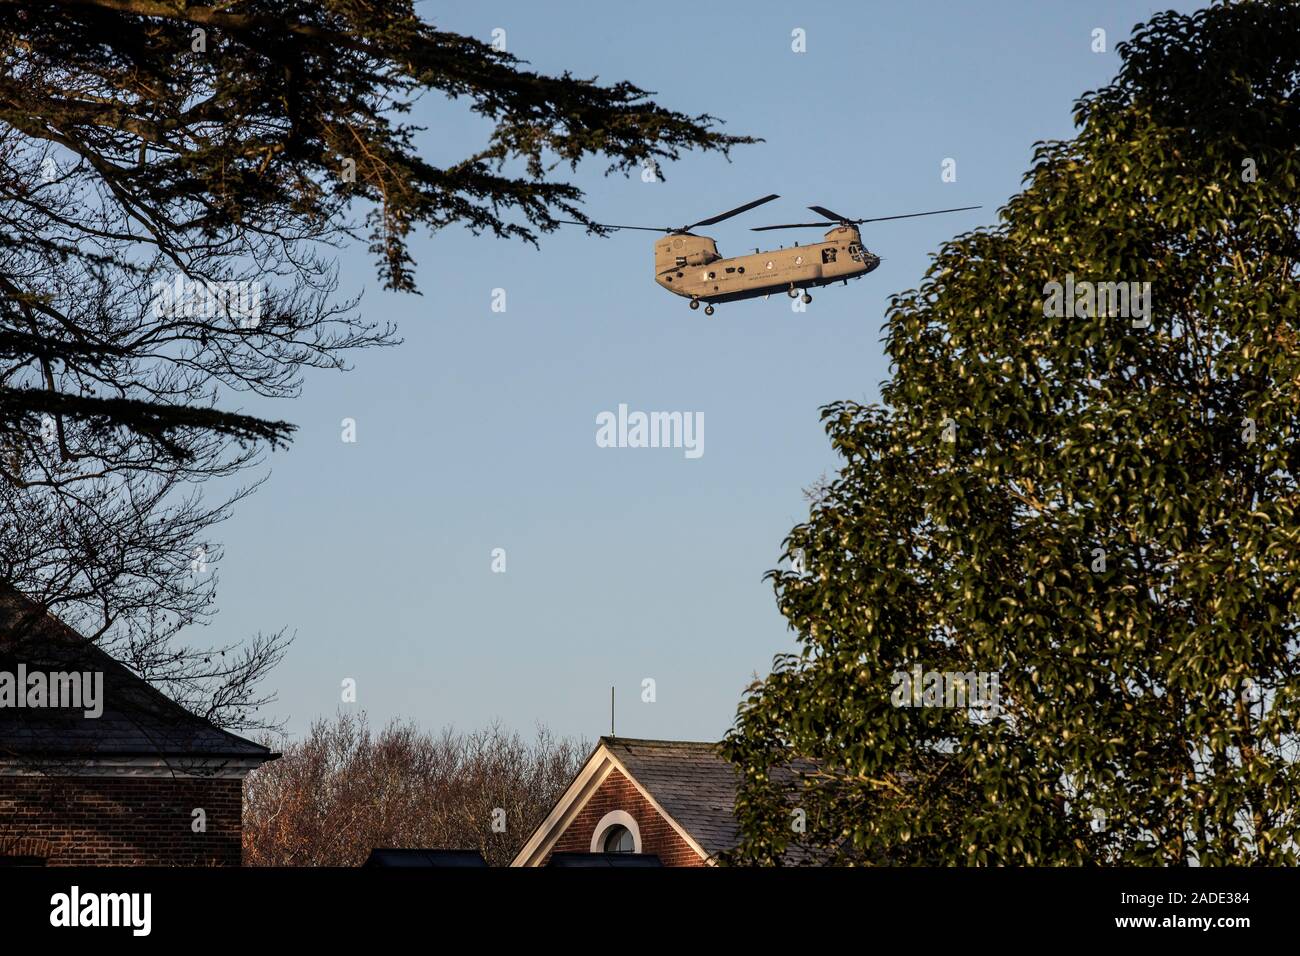 NATO 70th Anniversary, Watford, England, UK. 4th Dec, 2019. United States Army helicpters drop into The Grove in Watford for the start of the NATO Summit meeting as some of the most powerful world leaders will come together today. Credit: Jeff Gilbert/Alamy Live News Stock Photo